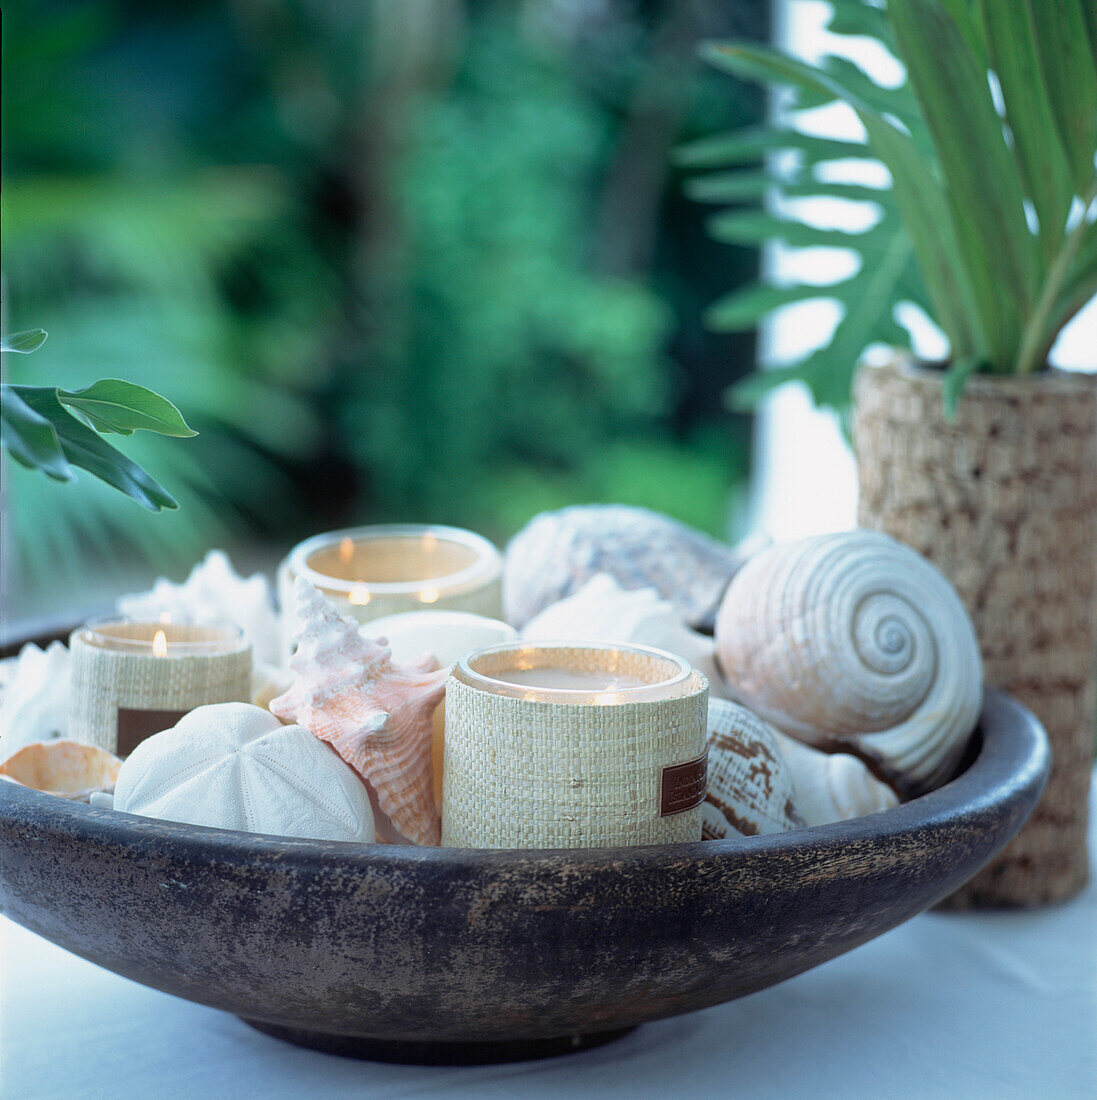 Scented candles lit and twinkling in a wooden bowl full of seashells on a table top